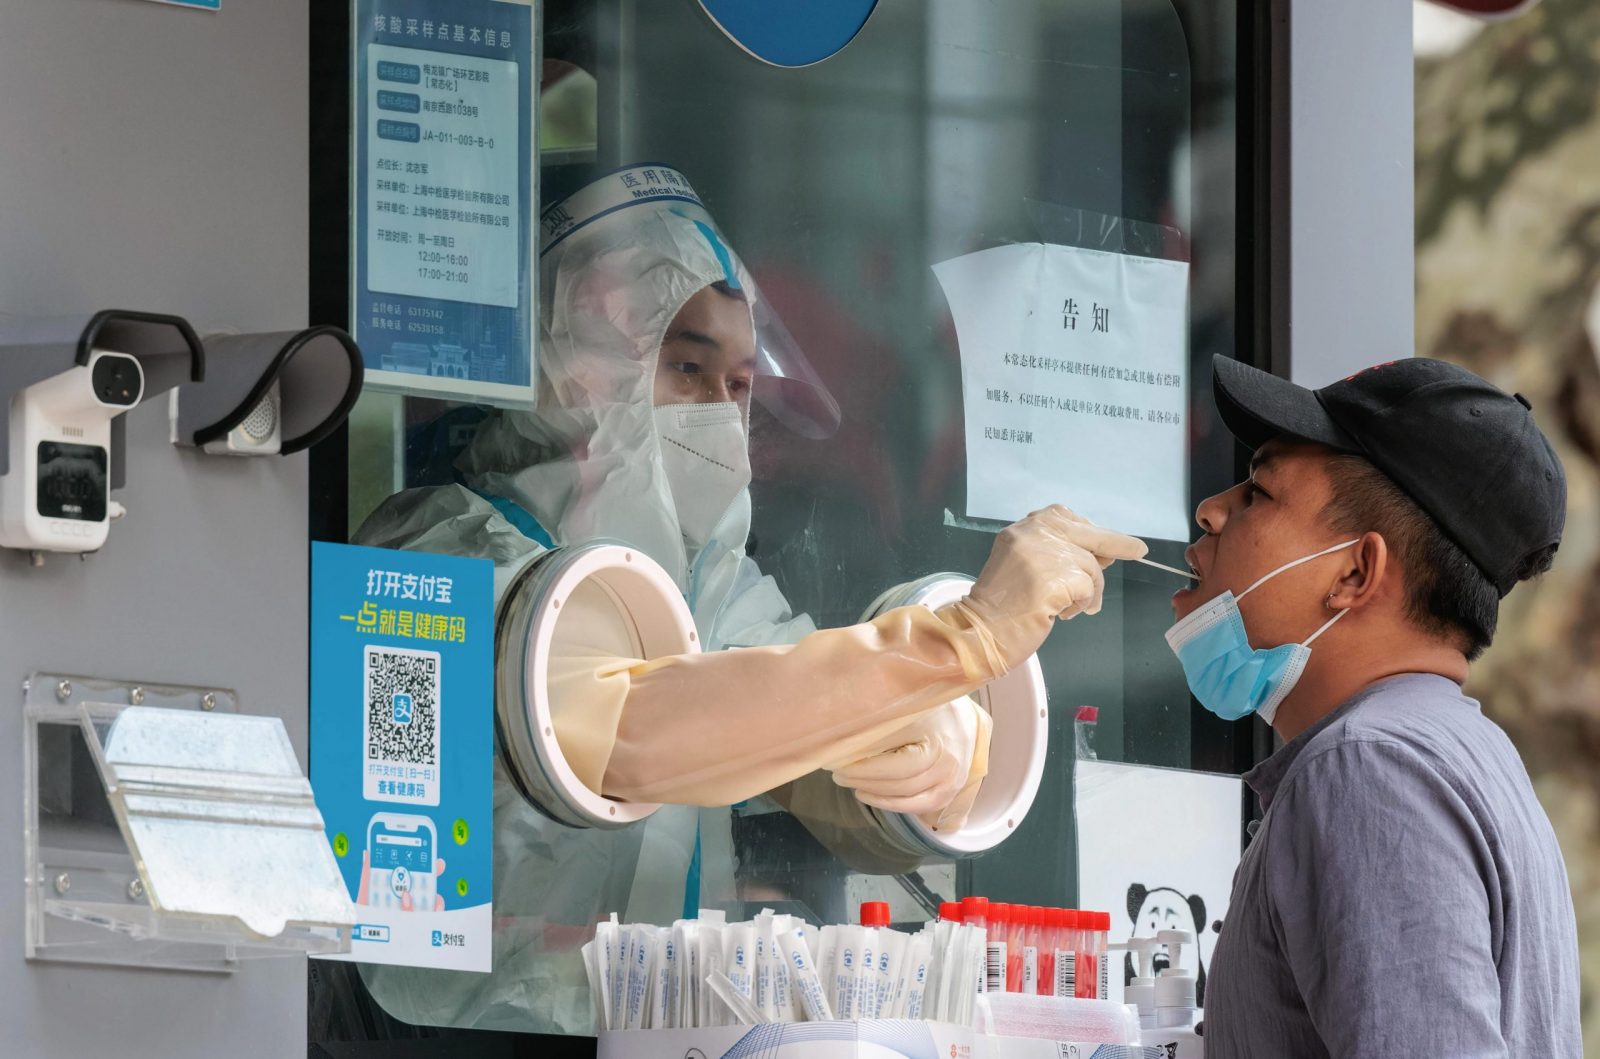 epa10270977 A man takes a Coronavirus PCR test on the street testing booth, in Shanghai, China, 28 October 2022. According to the Shanghai Health Commission report on 28 October, Shanghai city reported 11 local asymptomatic infections of COVID-19. 27 October, was the third day that China reported more than 1000 new cases nationwide. Therefore, cities from Xining in the northwest, through Wuhan in central China, to Guangzhou in the south, are locking down districts and sealing up buildings doubling down on COVID-19 curbs.  EPA/ALEX PLAVEVSKI